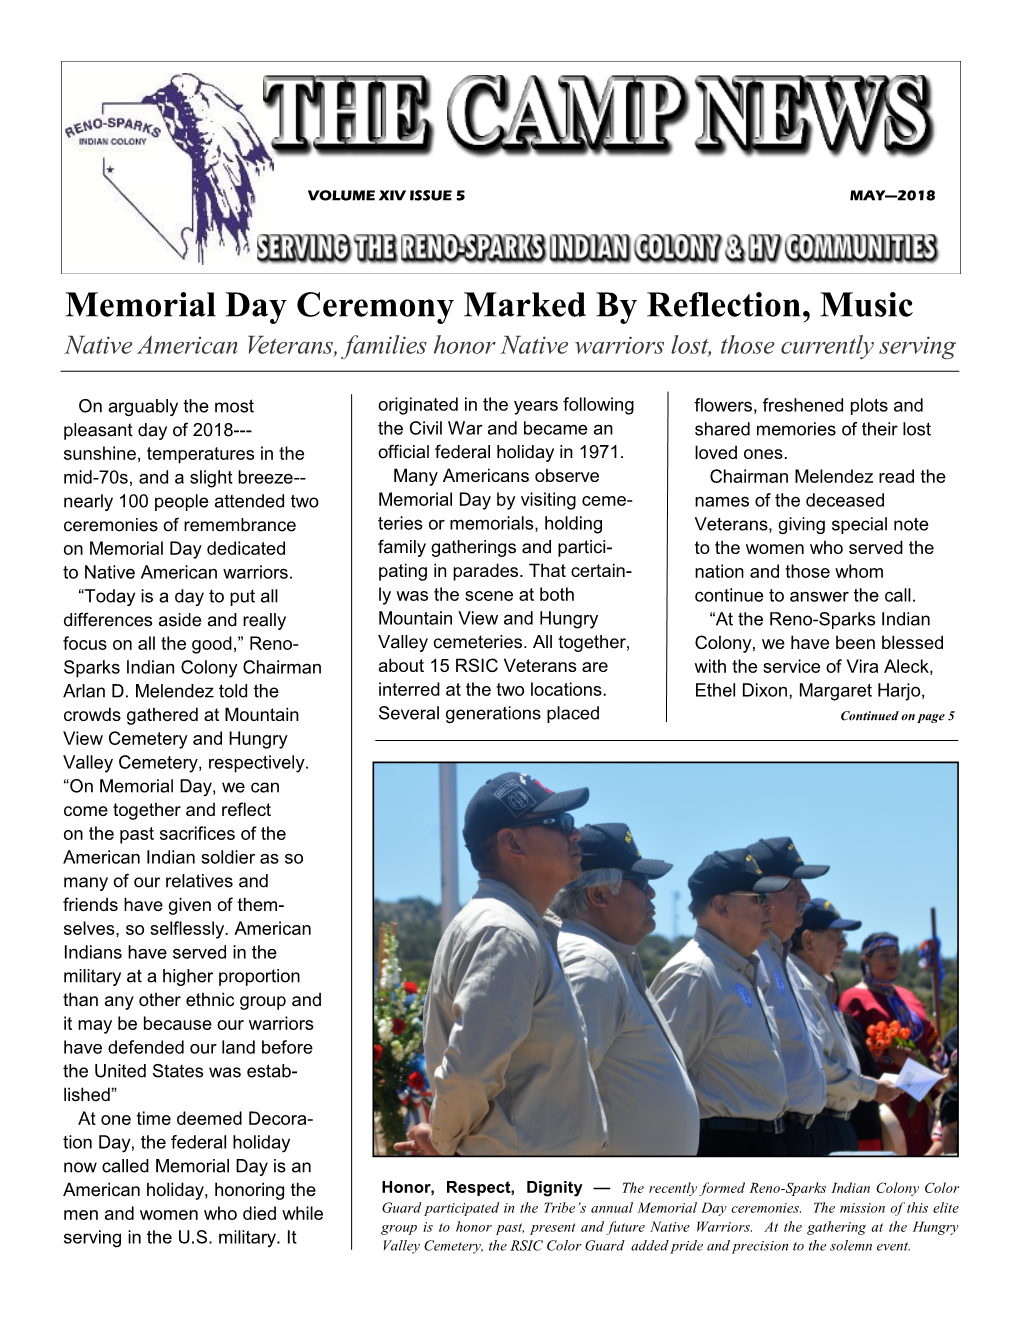 Memorial Day Ceremony Marked by Reflection, Music